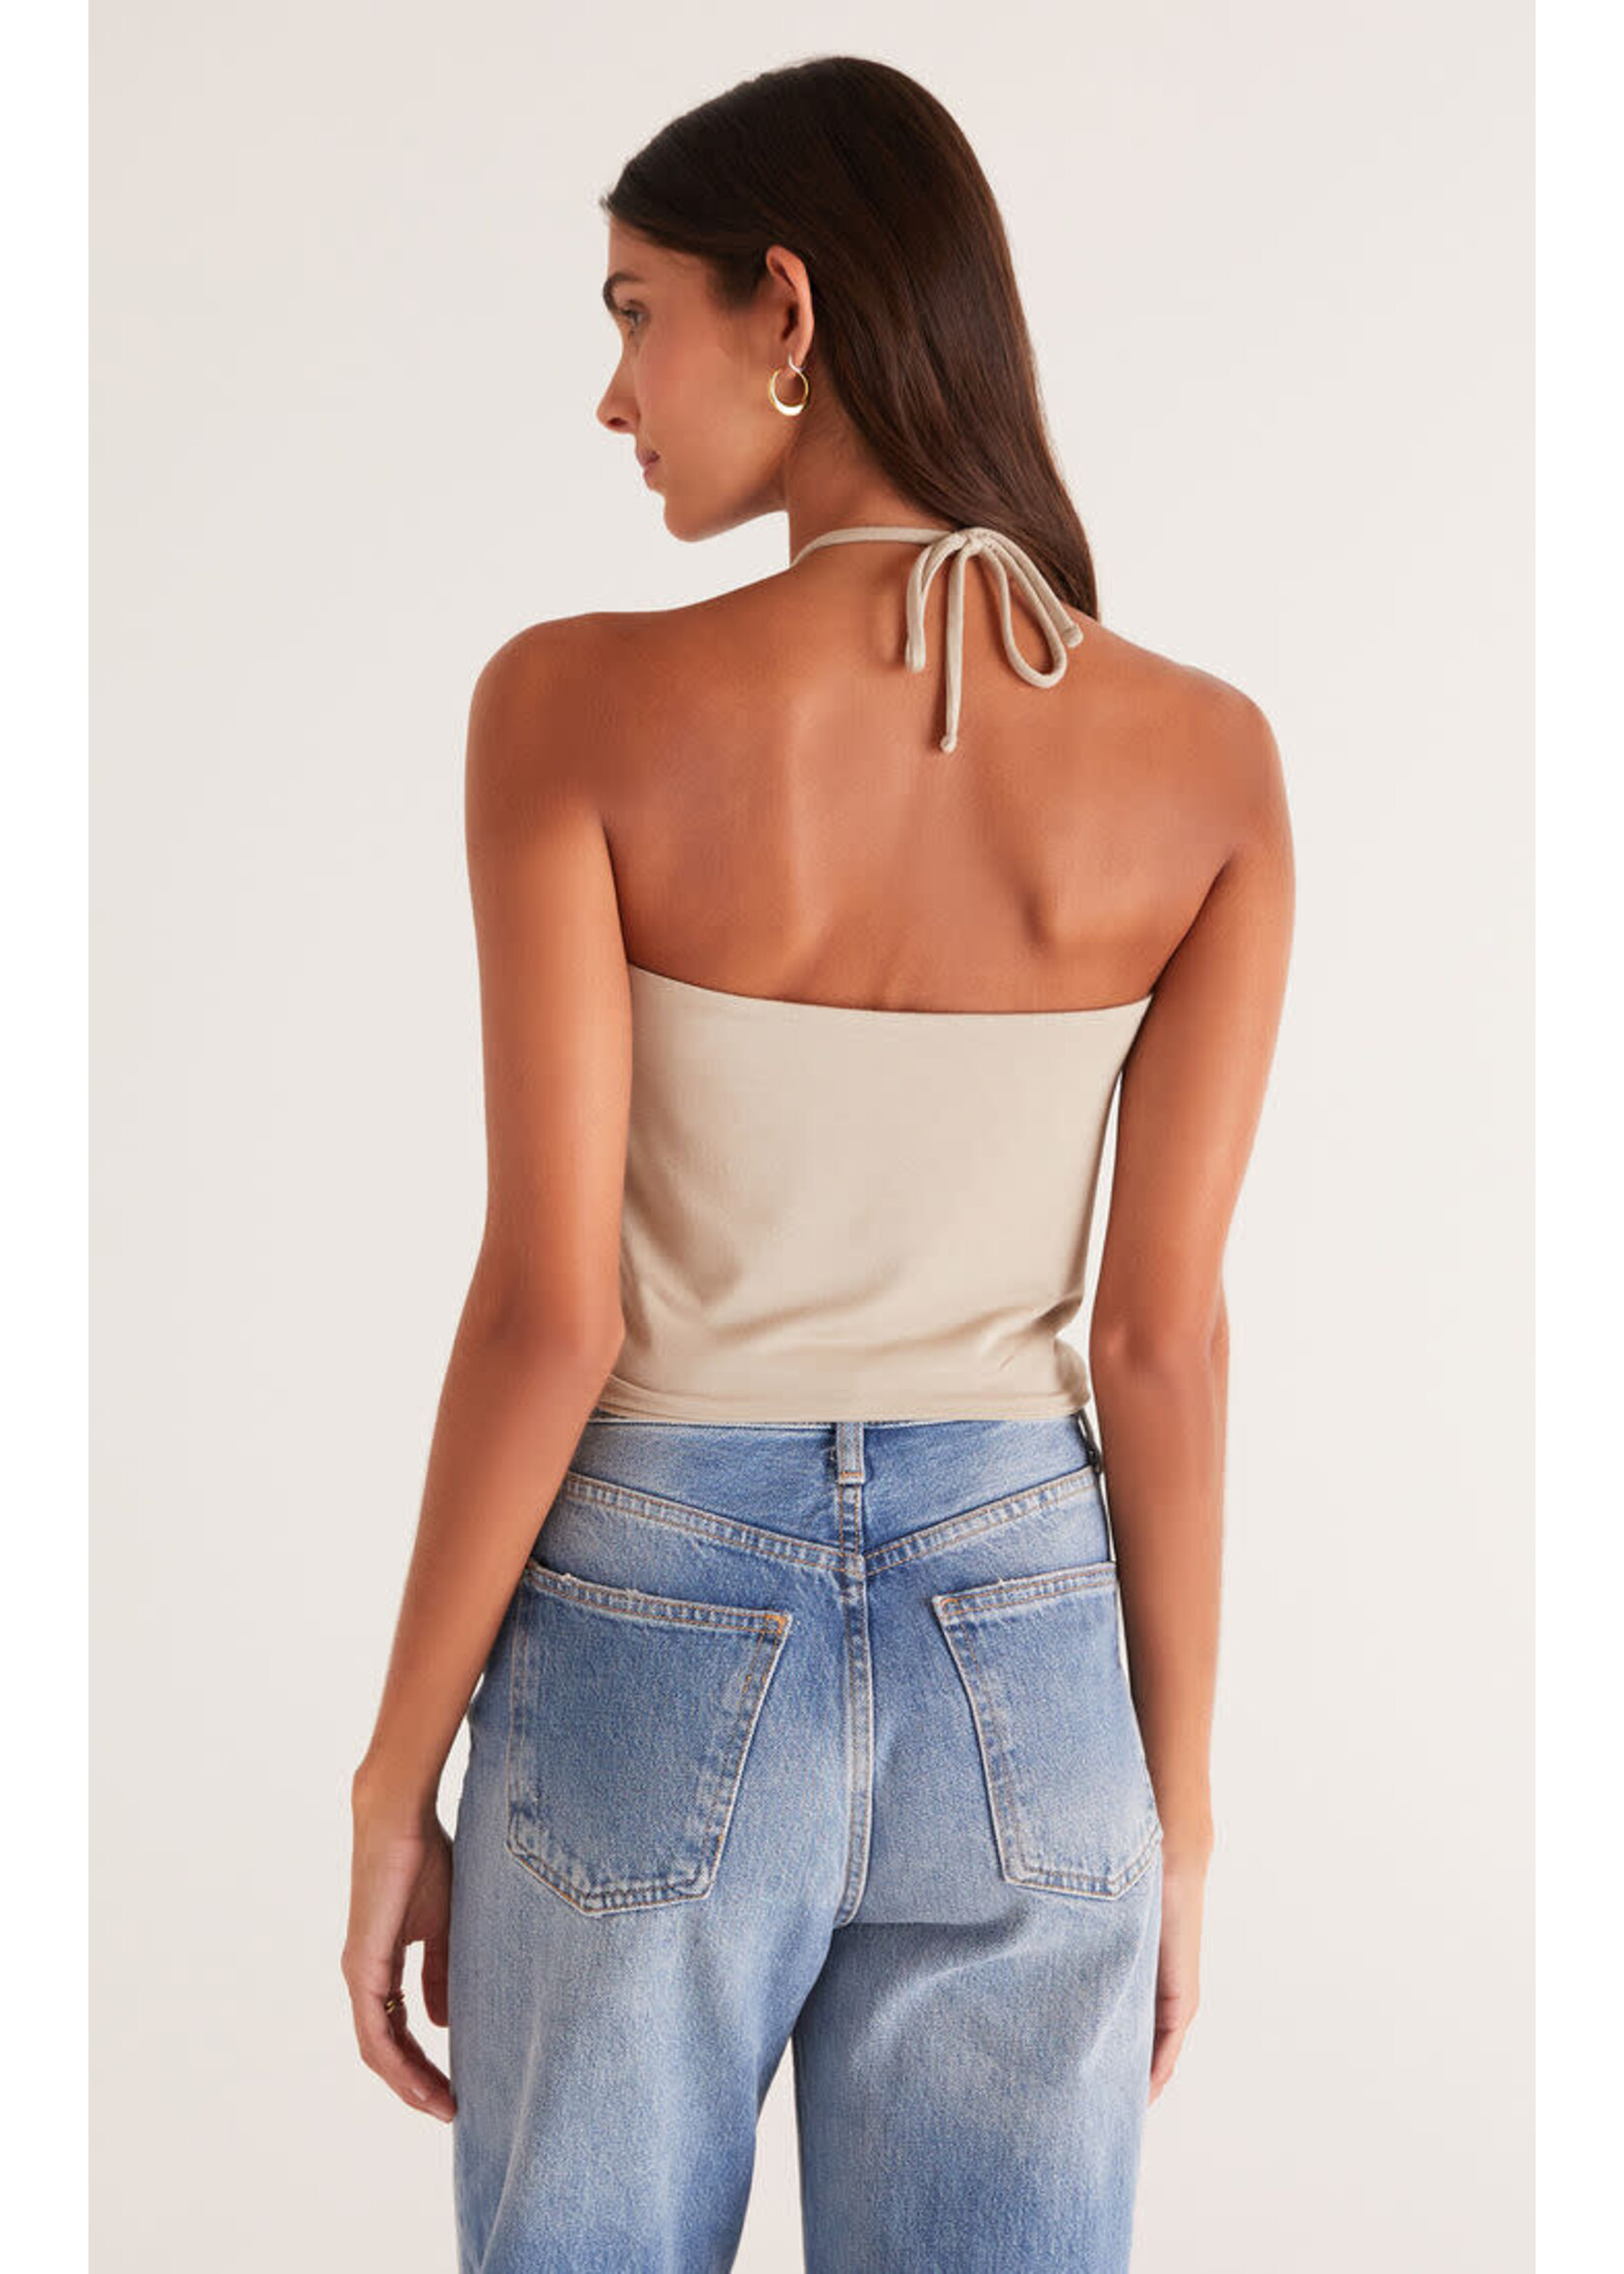 Z Supply ZS Olivia Date Top